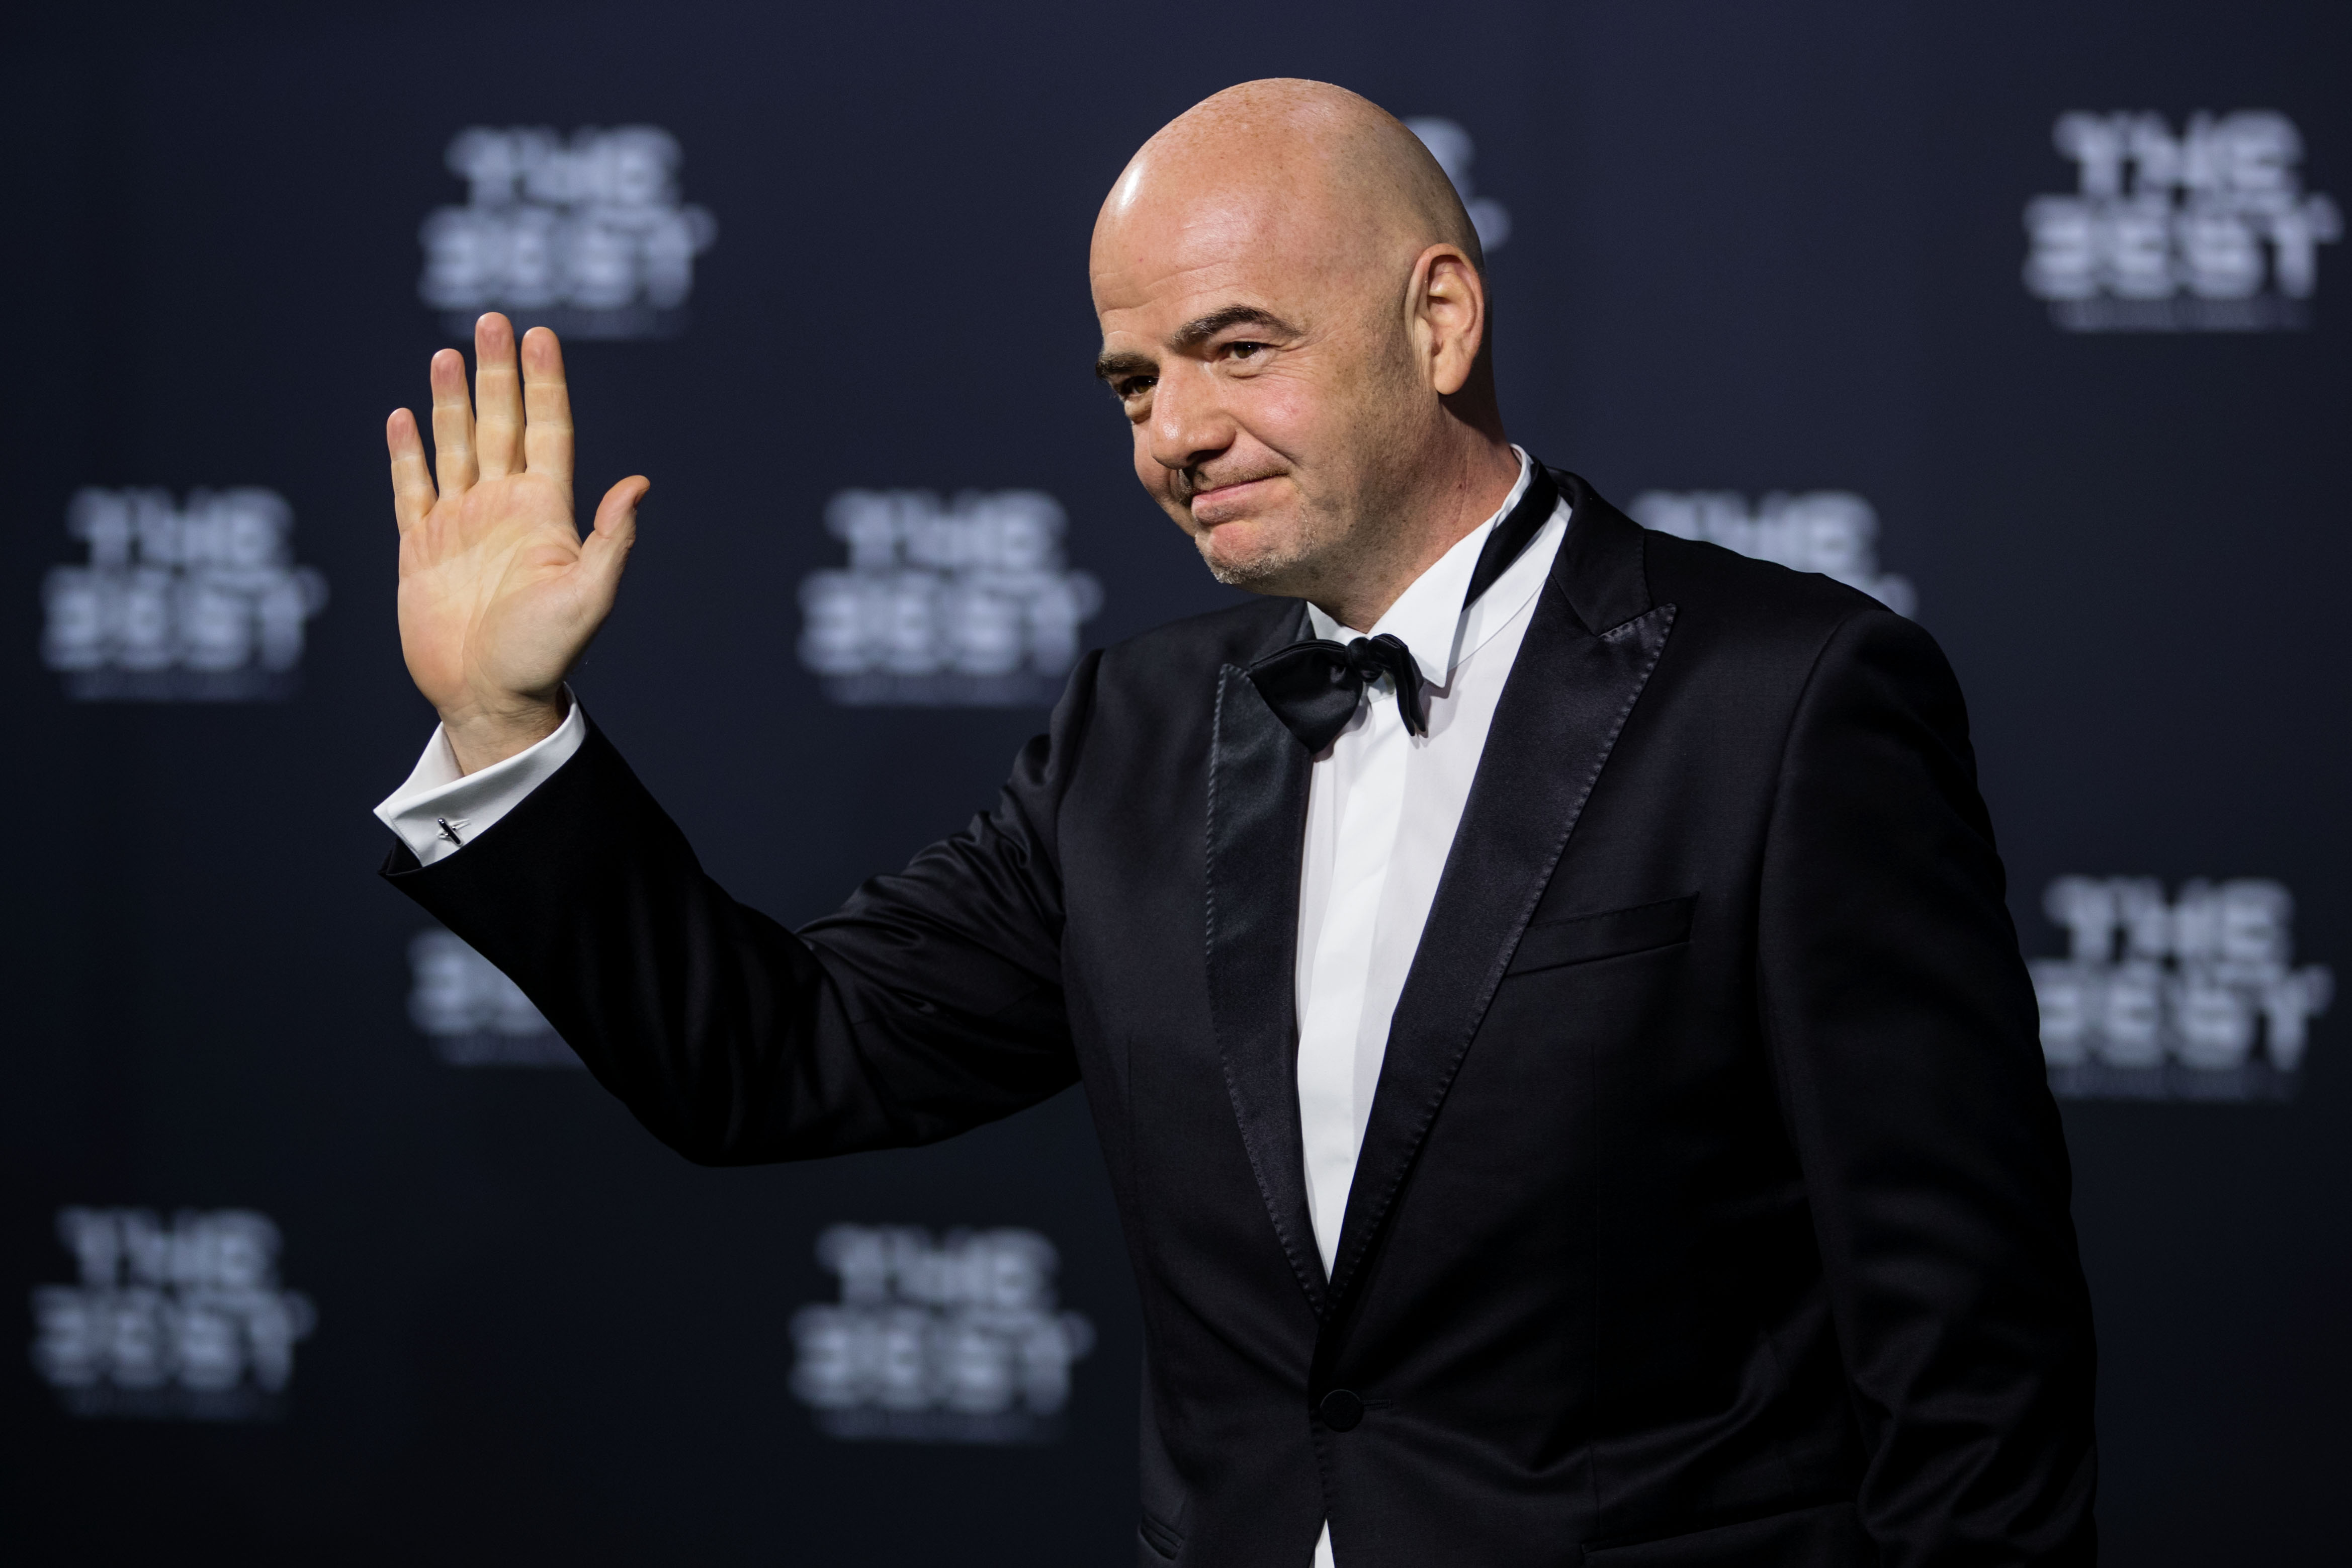 FIFA president Gianni Infantino arrives for The Best FIFA Football Awards 2016 in Zurich, Switzerland, on Jan. 9, 2017. (Philipp Schmidli—Getty Images)